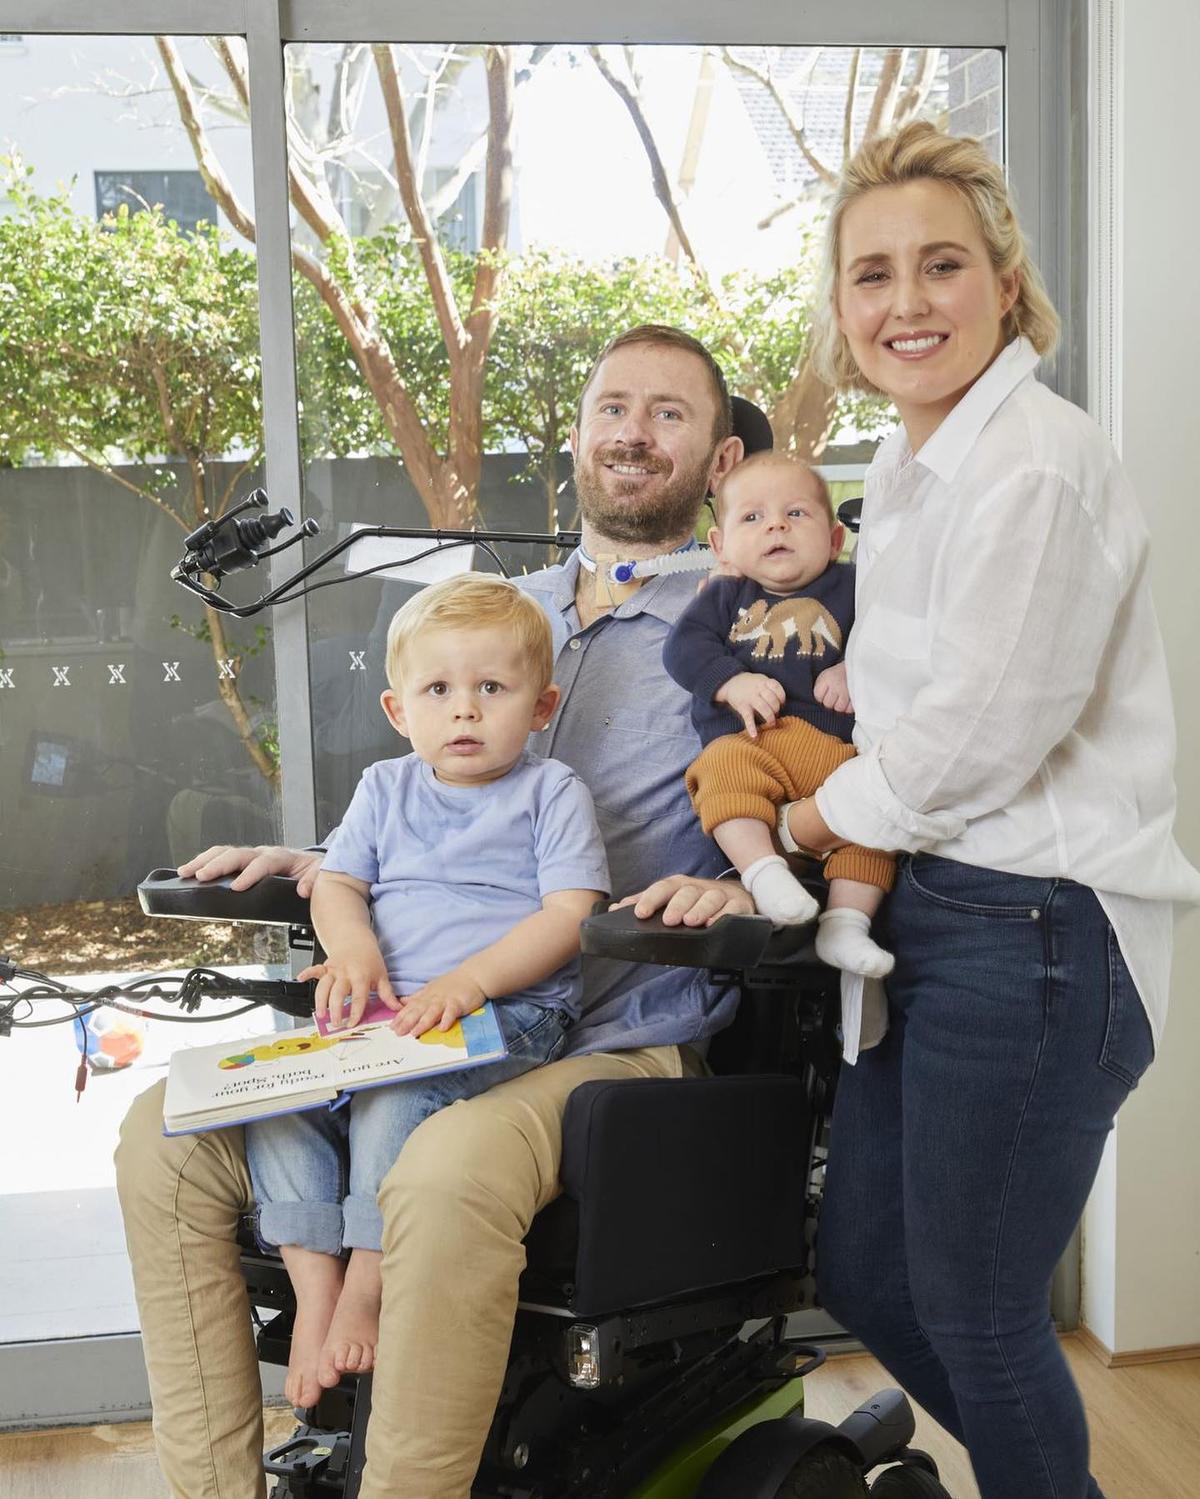 Nathan, Kate, and their boys Harry and Angus. (Courtesy of <a href="https://www.instagram.com/kate__stapleton/">Kate Stapleton</a>)